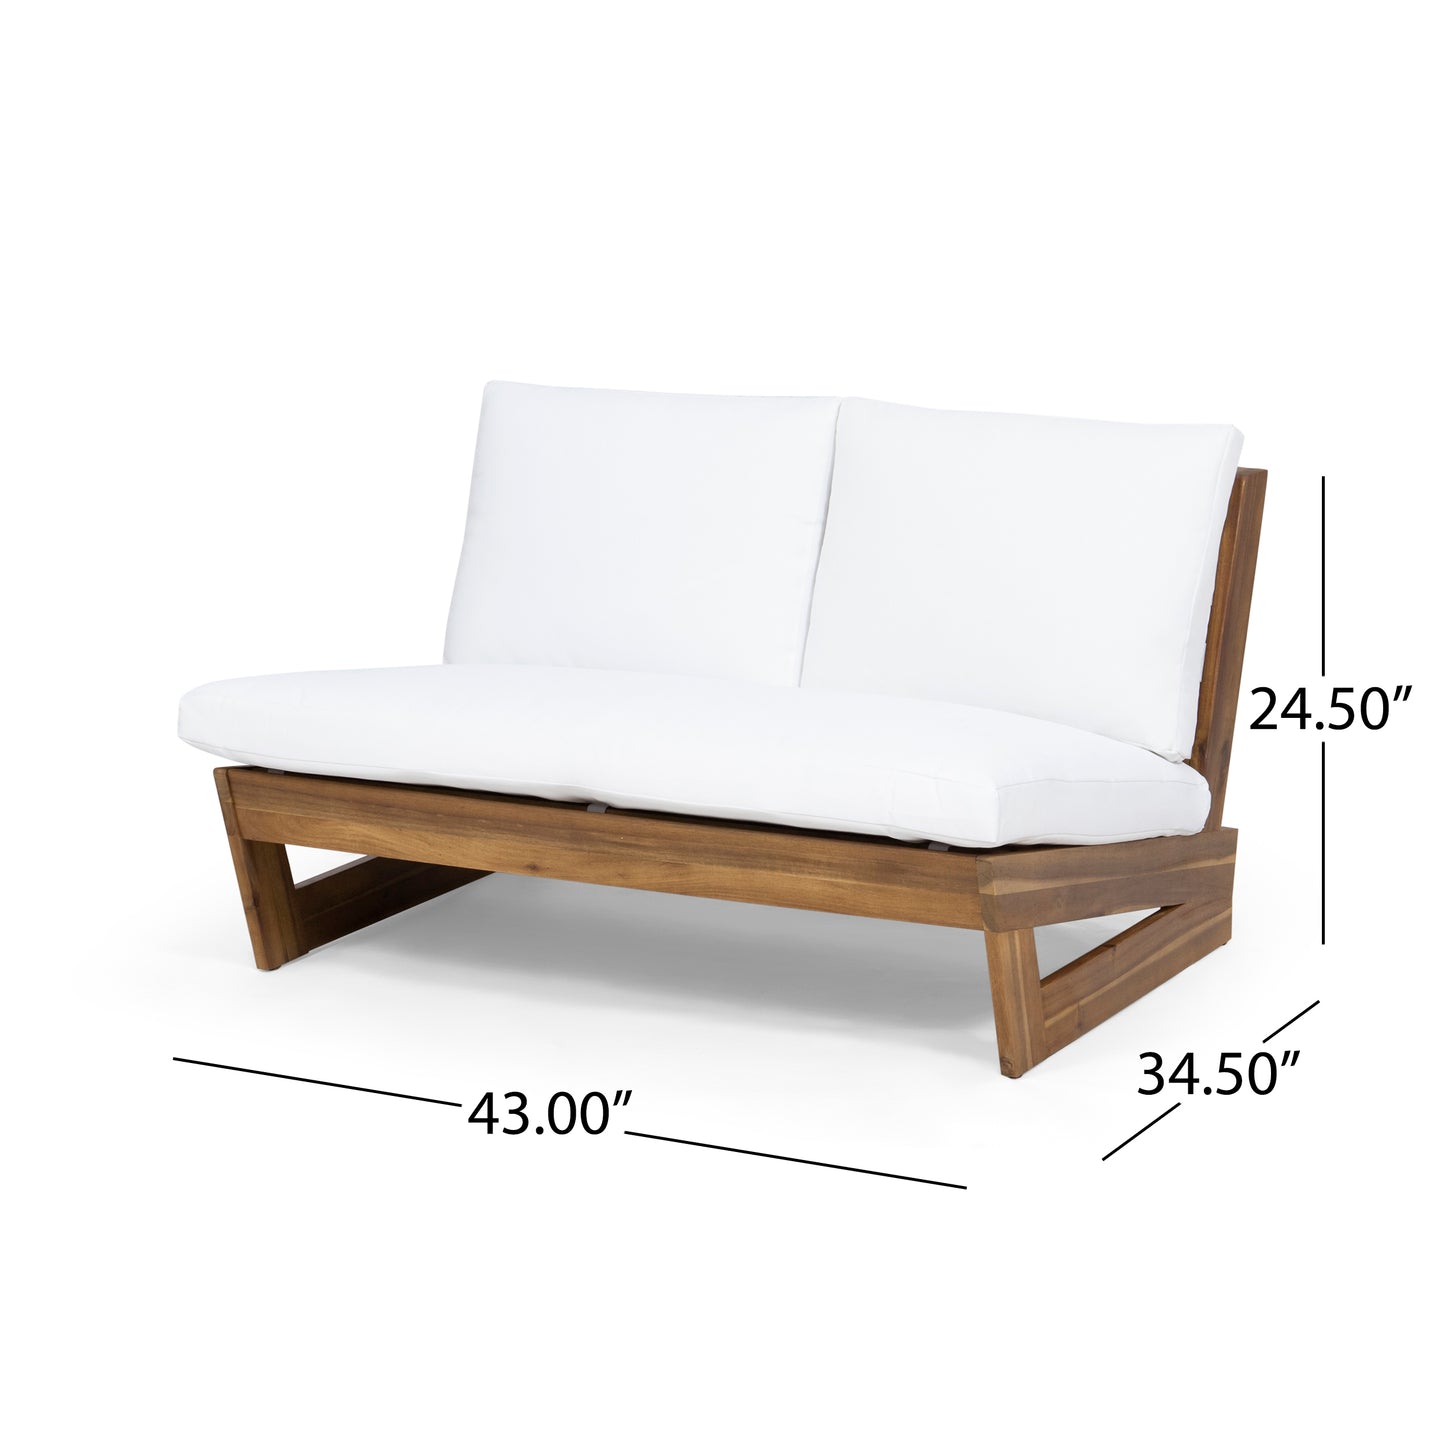 Emma Outdoor Acacia Wood Loveseat with Cushions